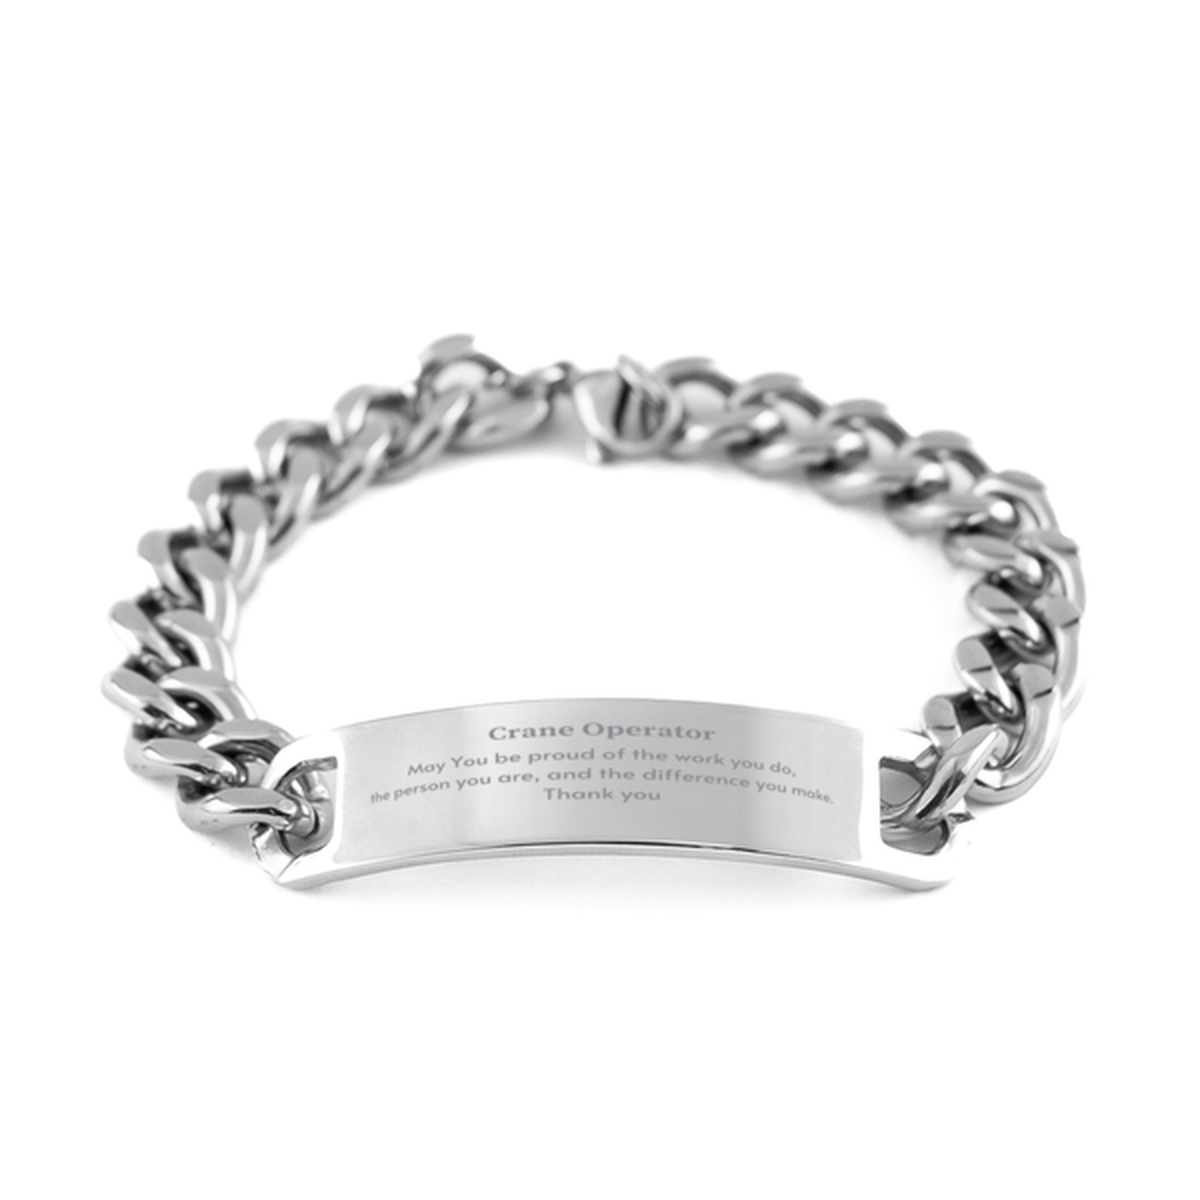 Heartwarming Cuban Chain Stainless Steel Bracelet Retirement Coworkers Gifts for Crane Operator, Crane Operator May You be proud of the work you do, the person you are Gifts for Boss Men Women Friends